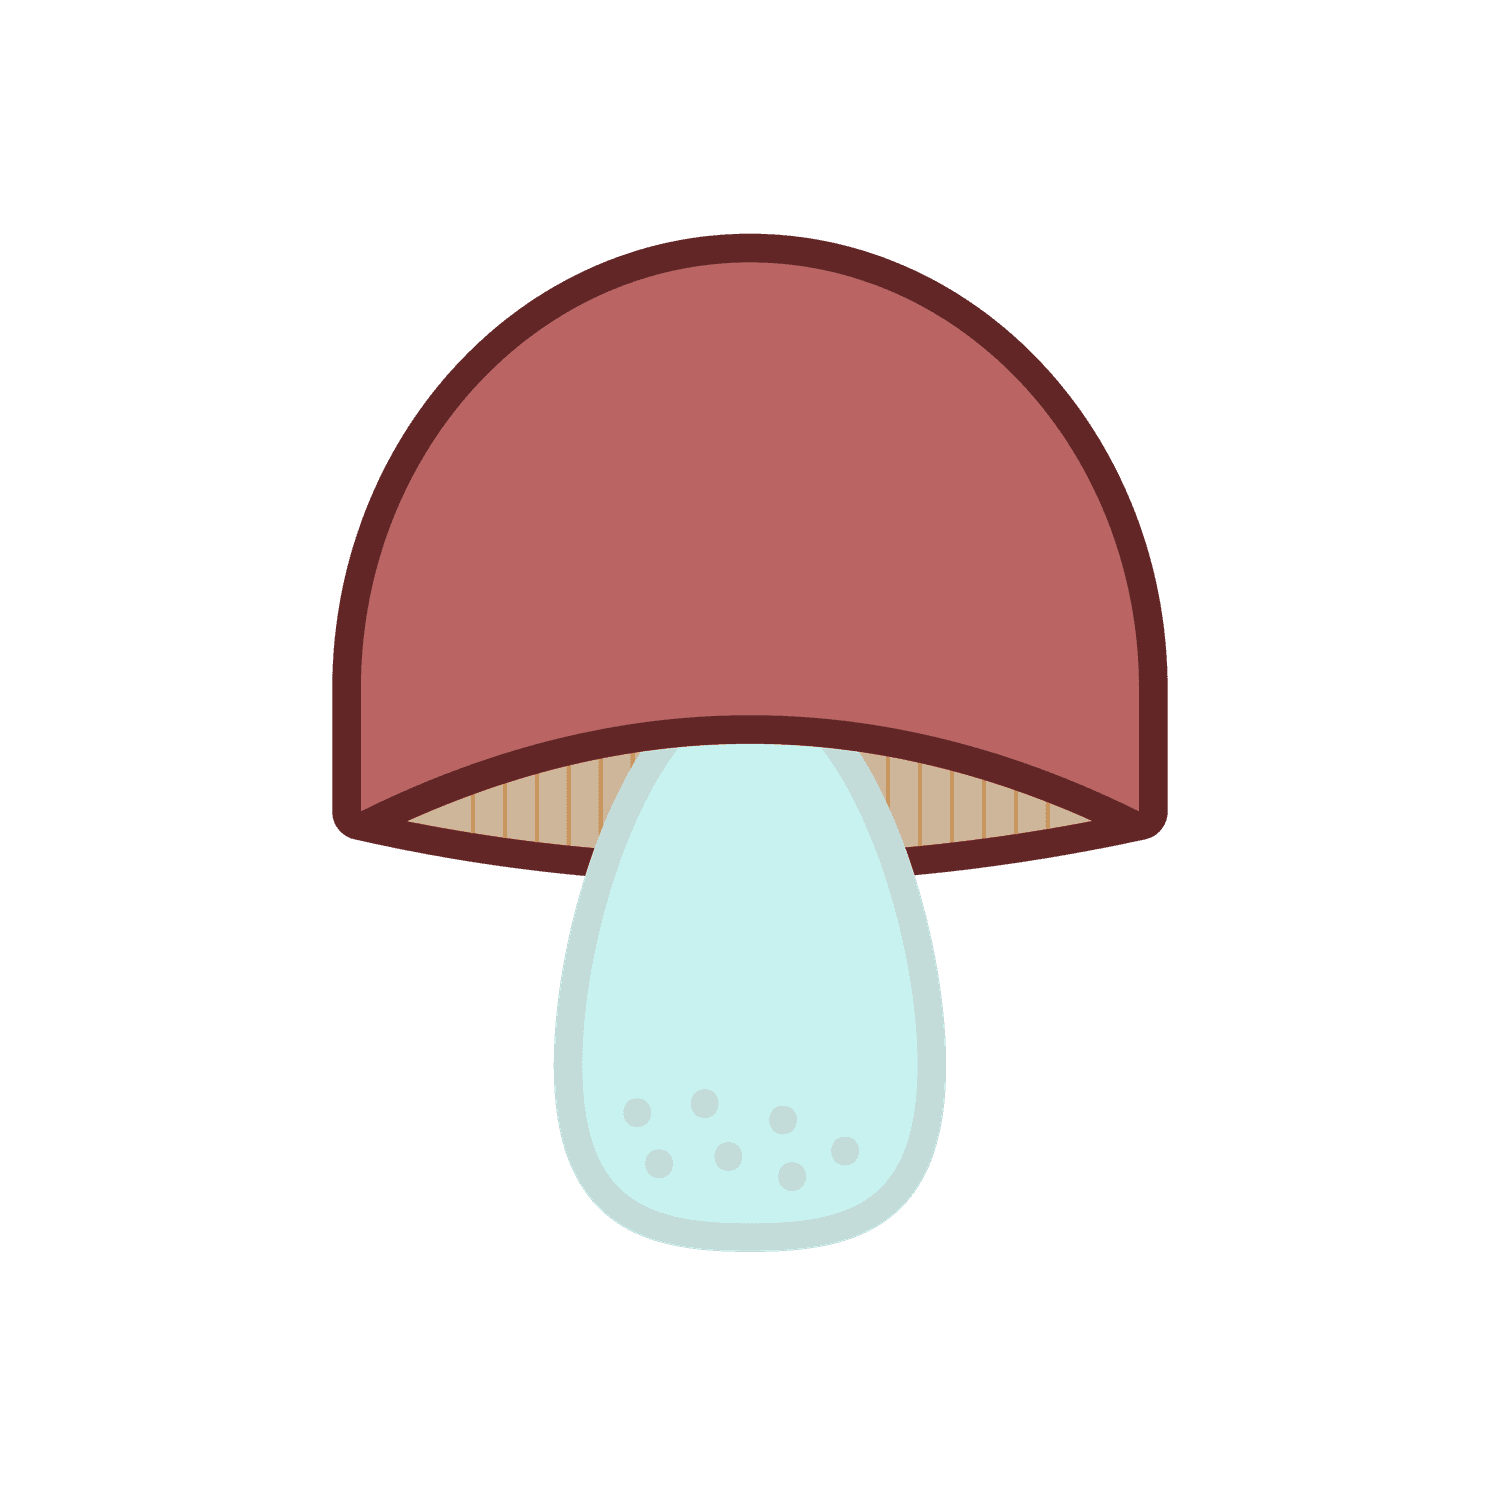 Hand drawn mushroom icon with classic colors